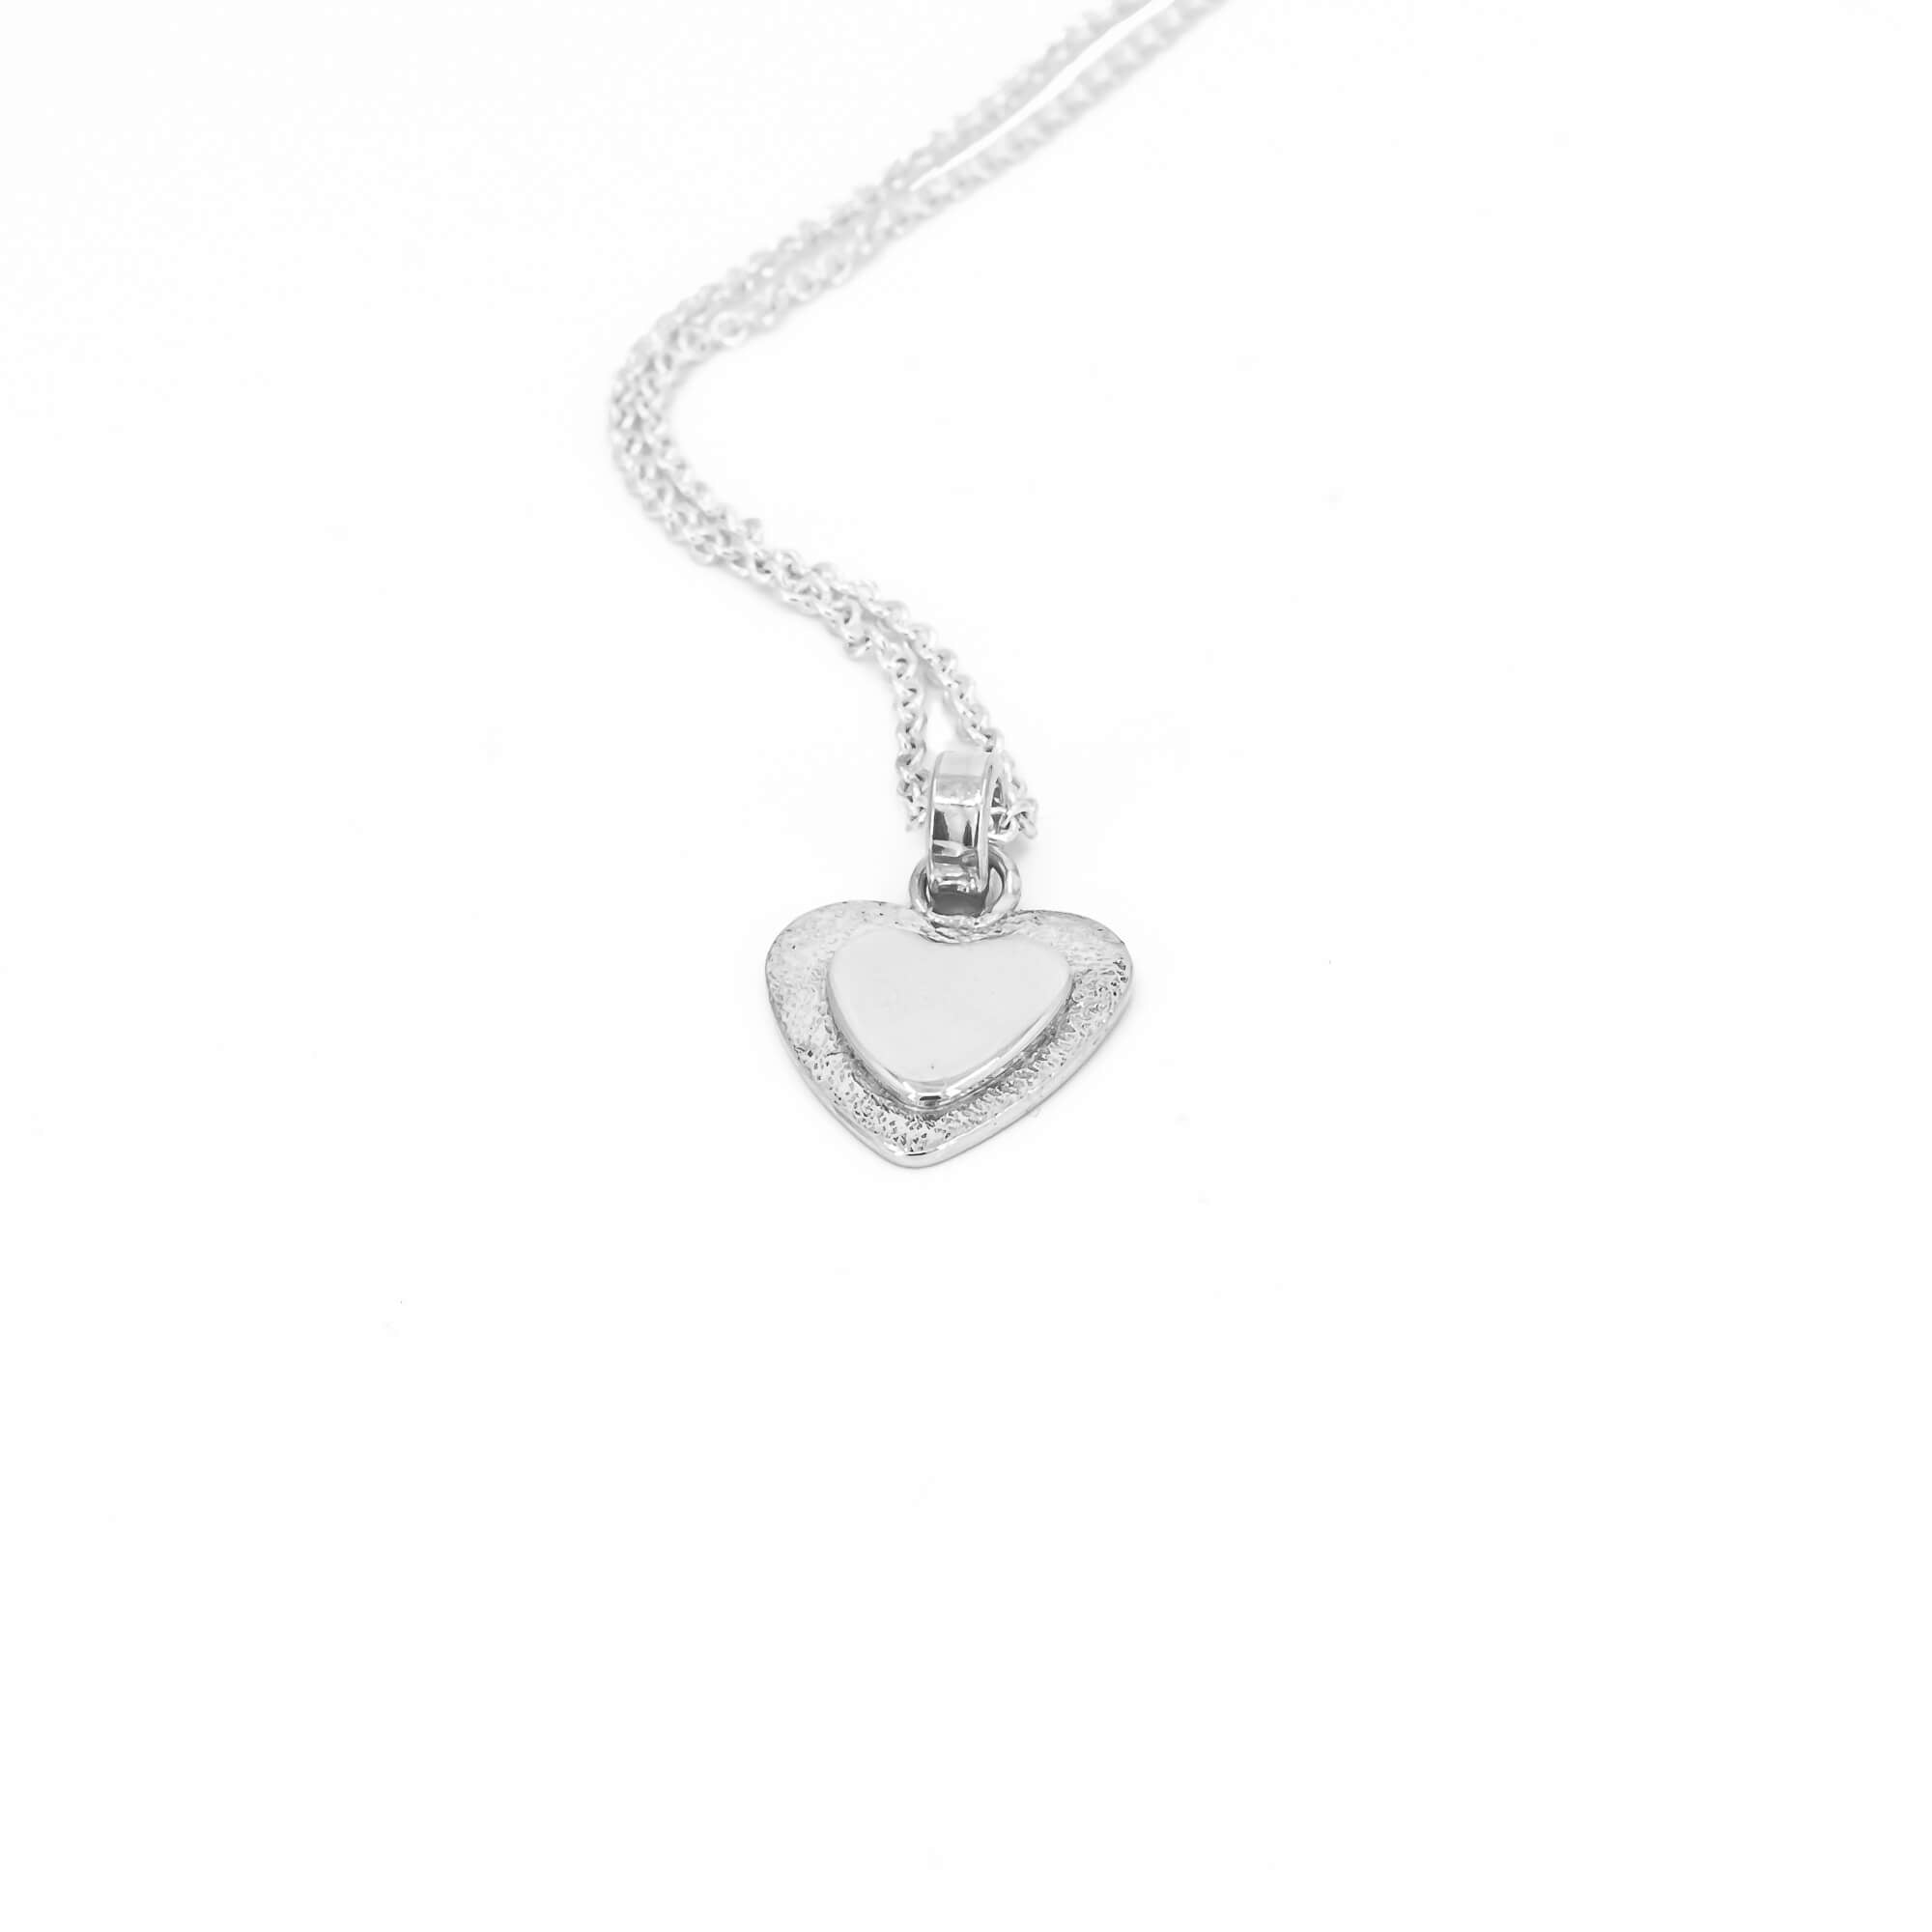 Sterling silver heart necklace with stardust texture